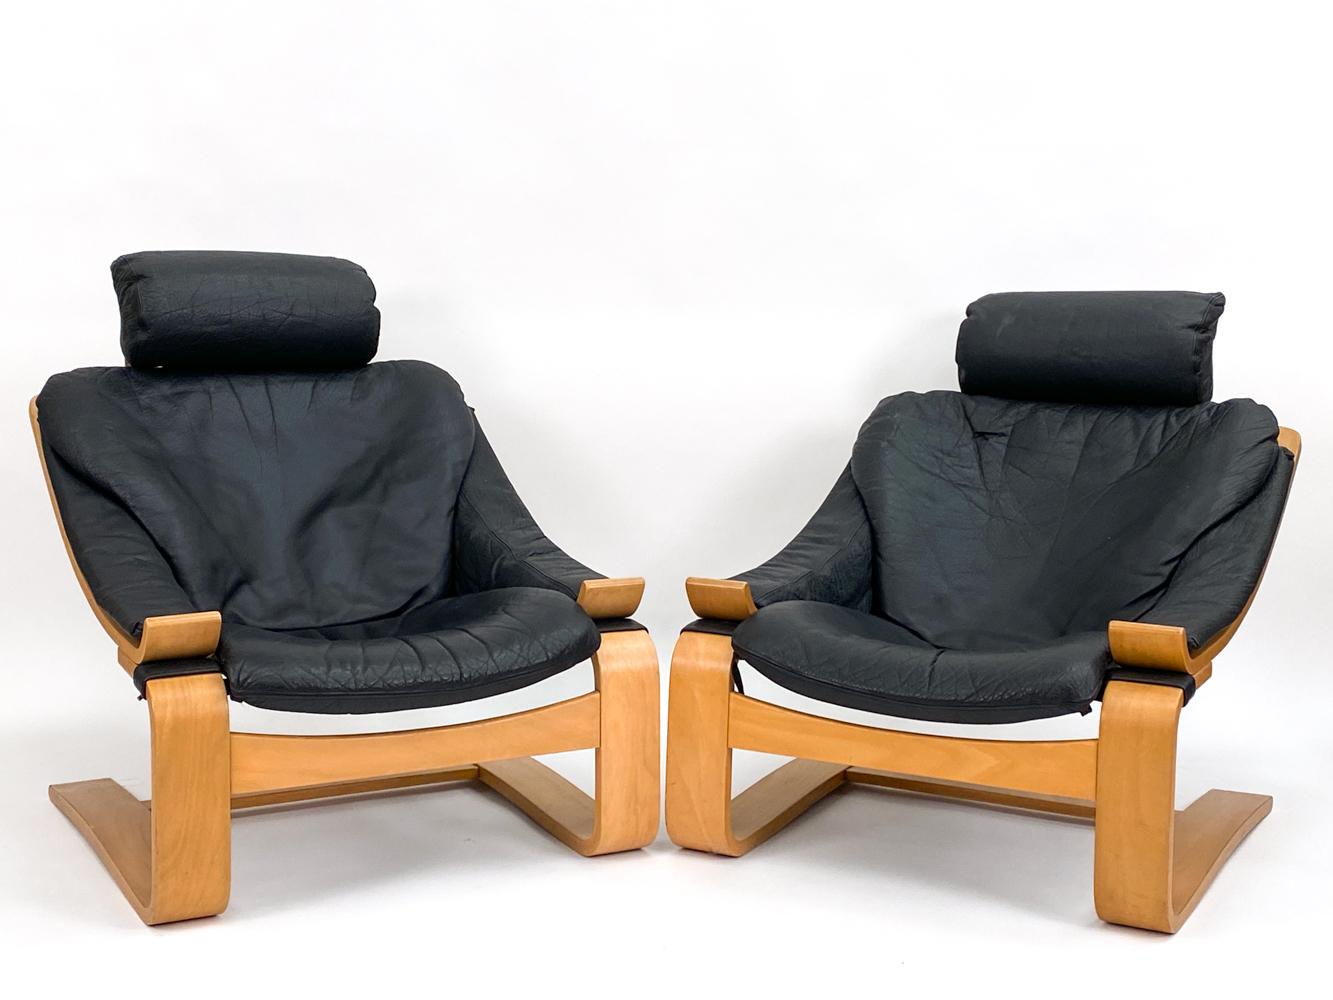 20th Century '4' Kroken Buffalo Leather Lounge Chairs by Åke Fribytter for Nelo Sweden, 1970s For Sale